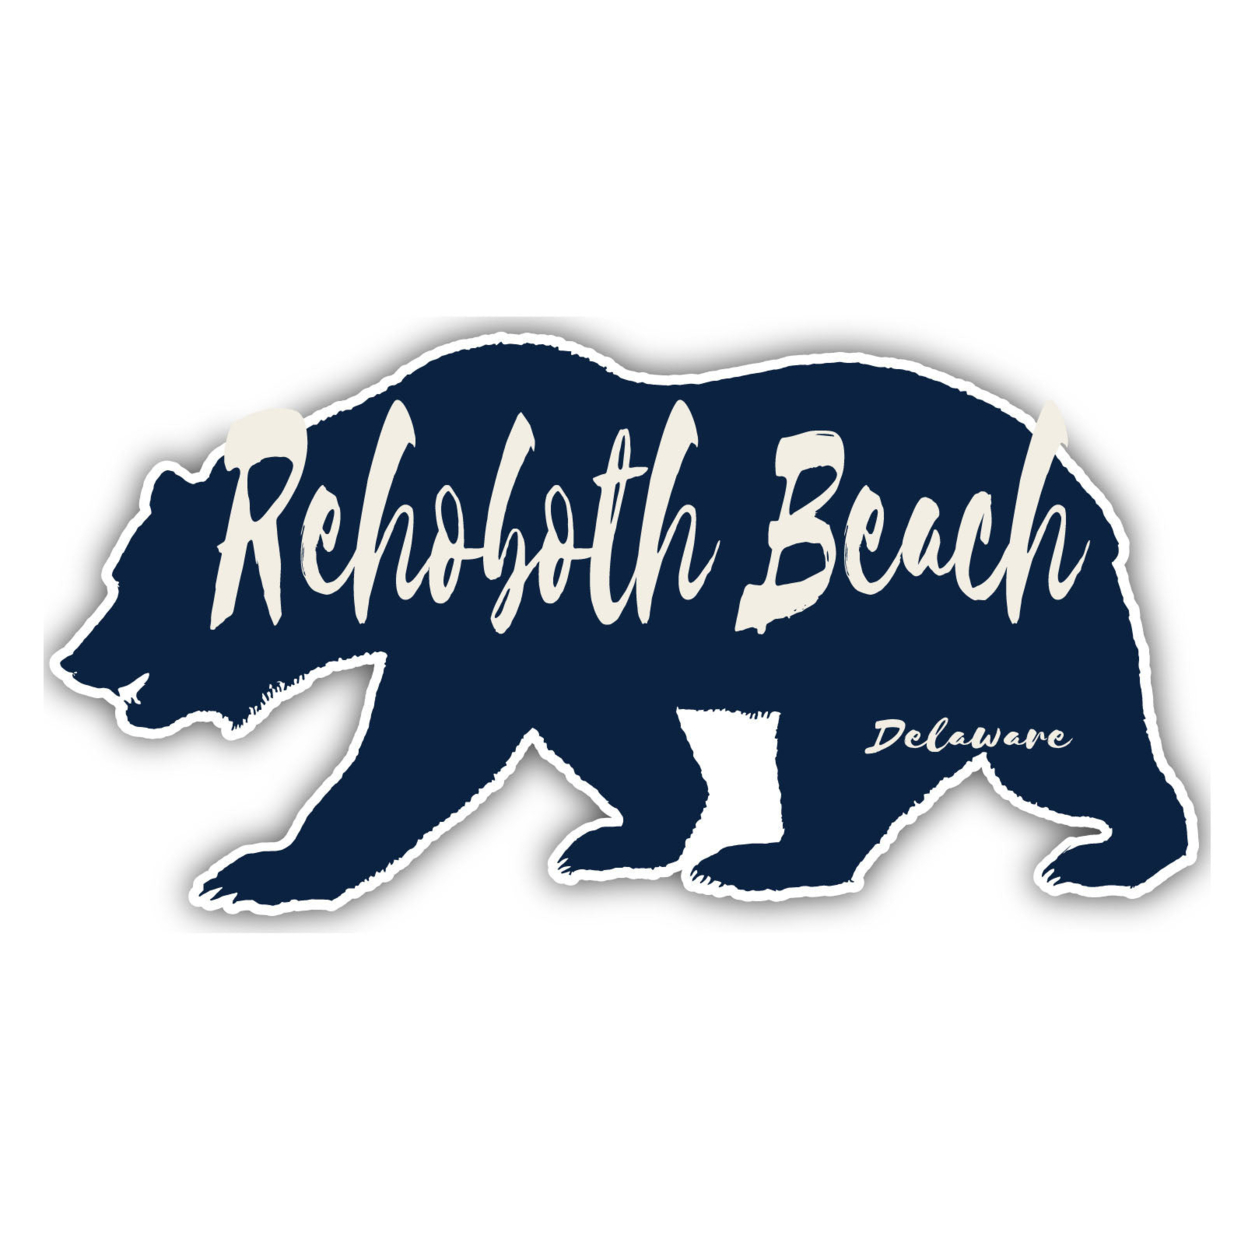 Rehoboth Beach Delaware Souvenir Decorative Stickers (Choose Theme And Size) - Single Unit, 2-Inch, Bear